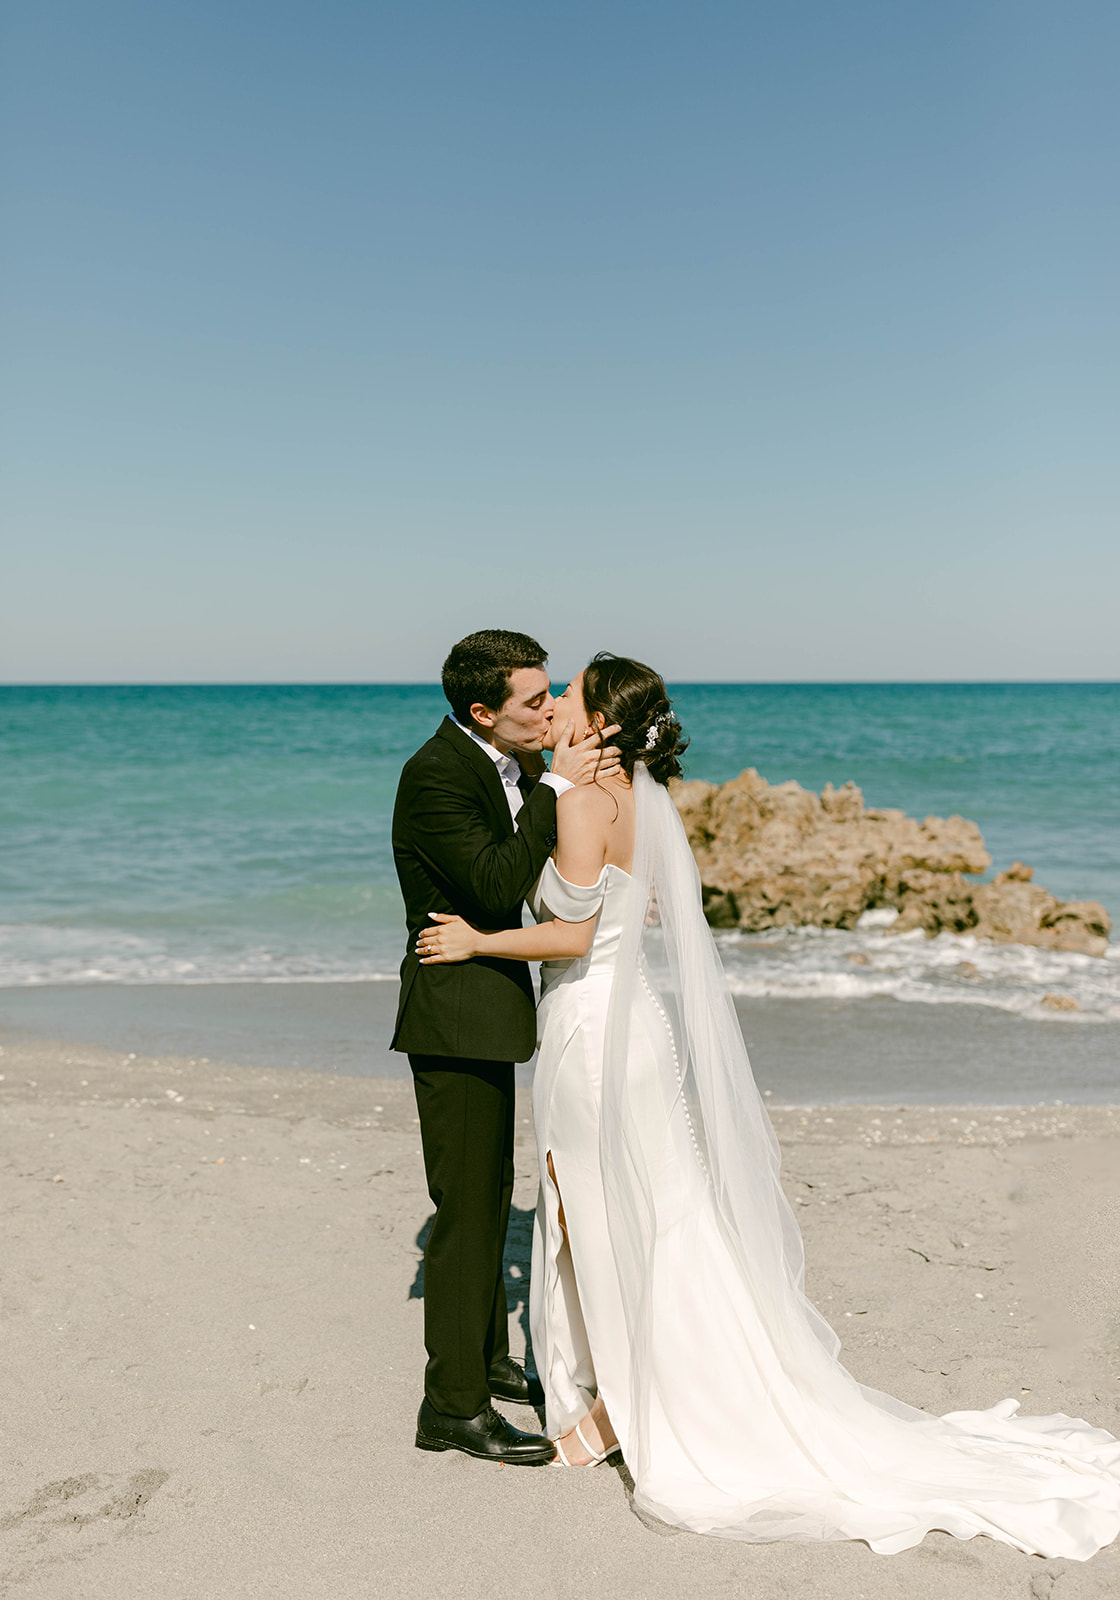 Bride and Groom share their first kiss in intimate Palm Beach, Florida wedding on the beach